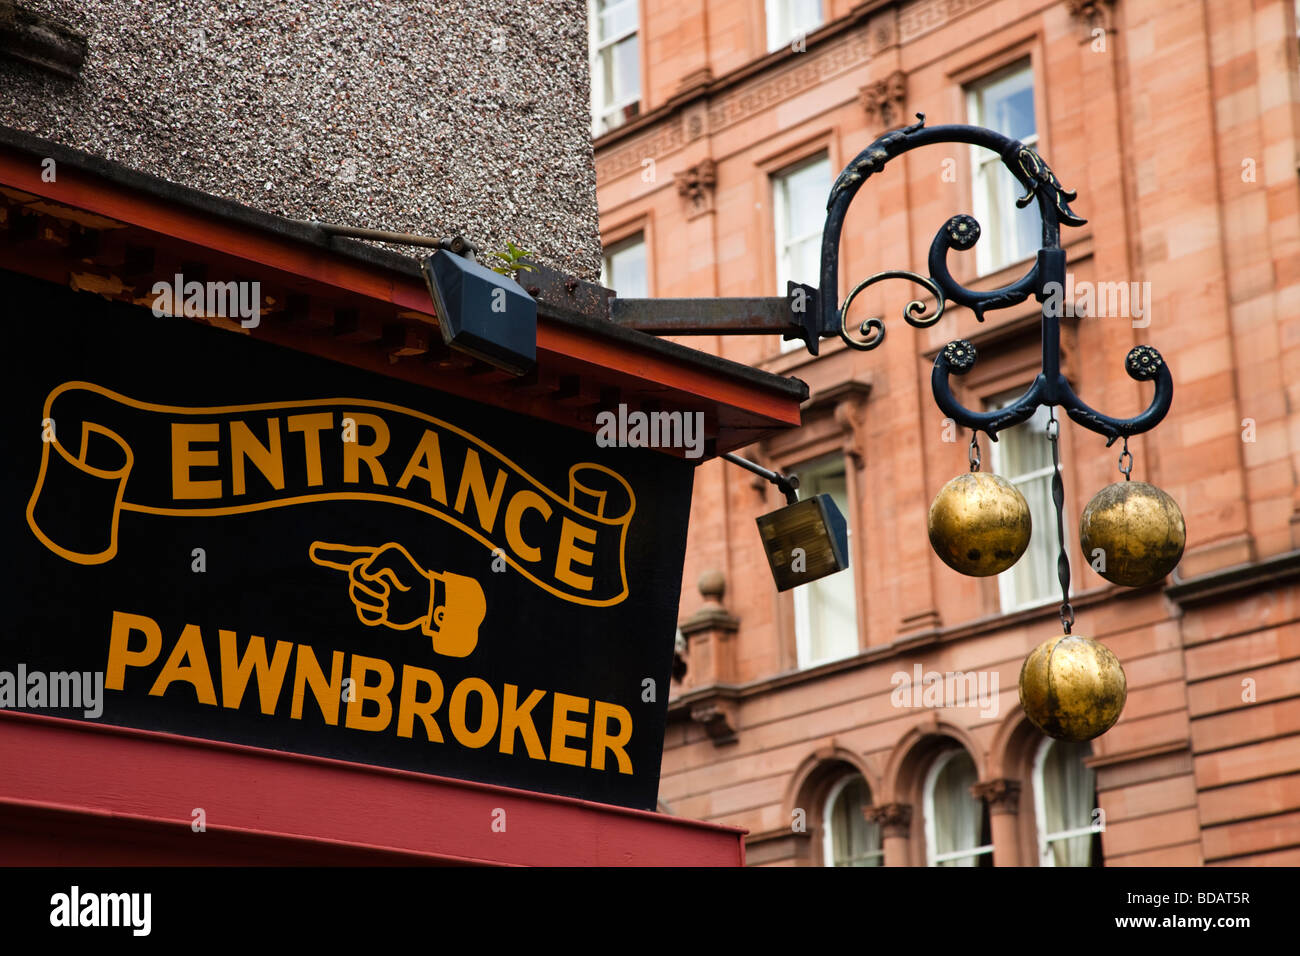 Pawnbrokers sign and notice outside shop, Glasgow, Scotland, UK, Great Britain Stock Photo